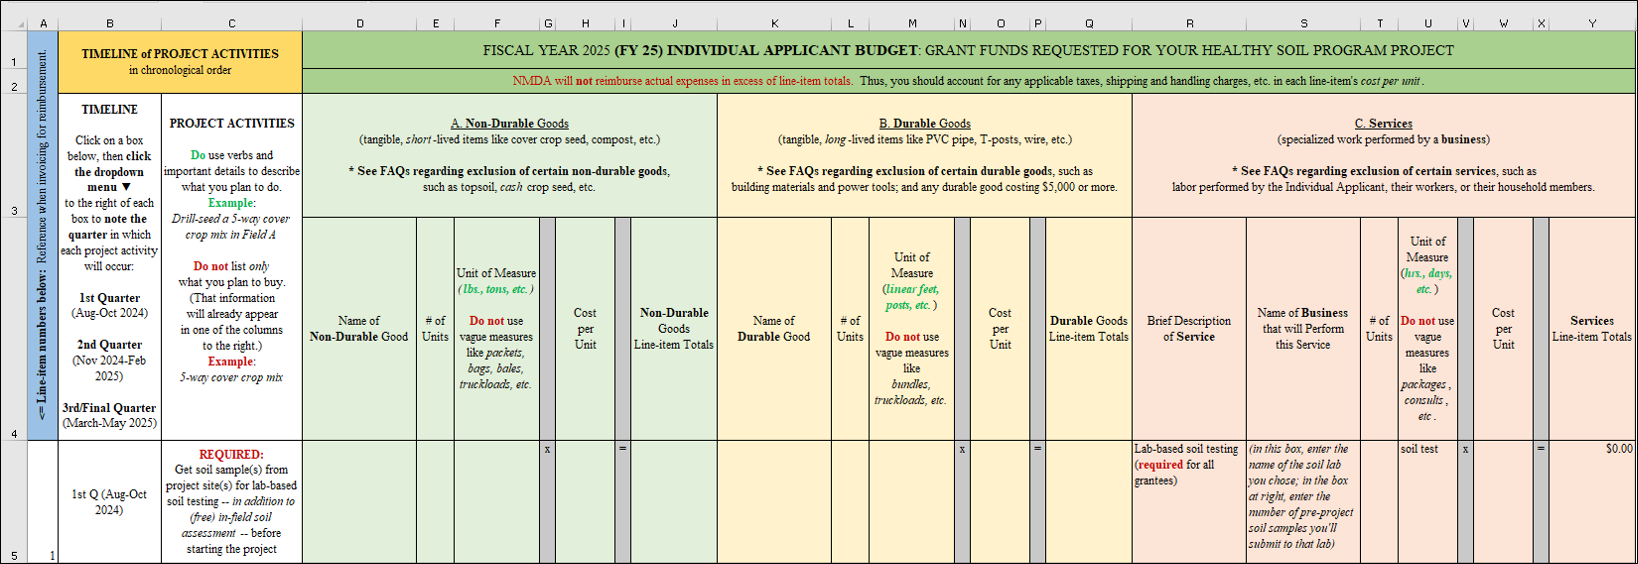 individual applicant timeline and budget template.